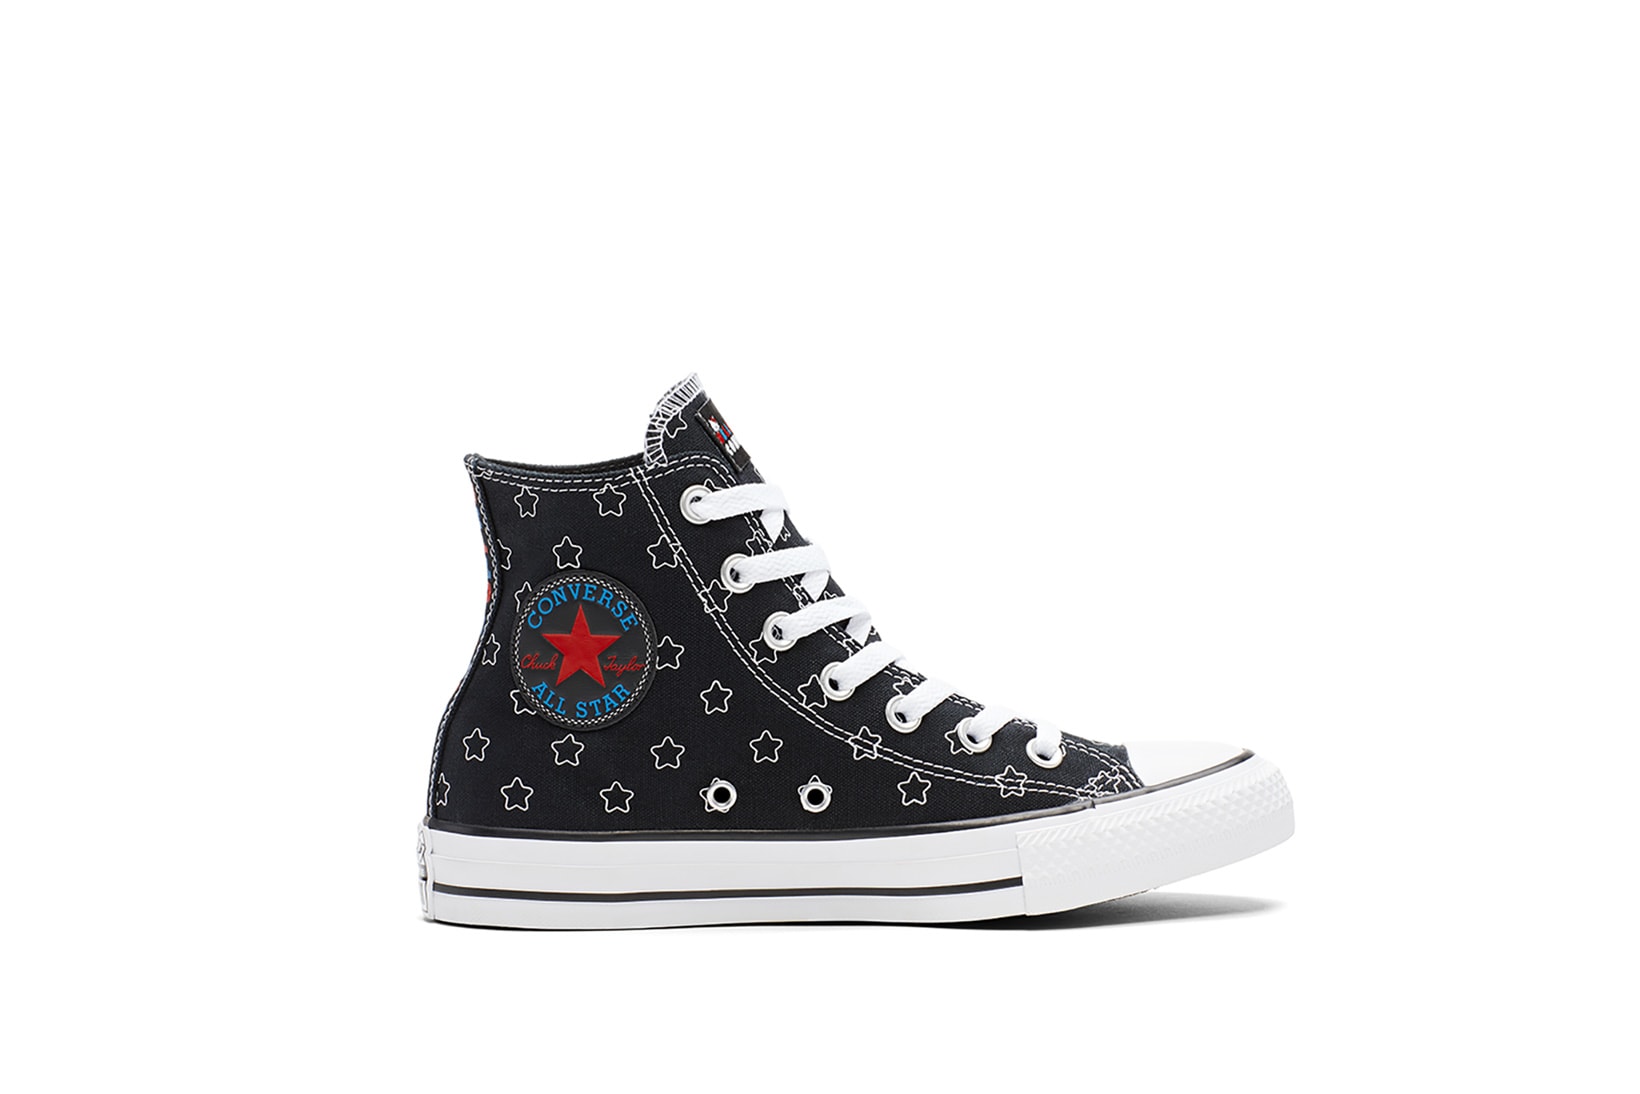 Converse x Hello Kitty Collaboration One Star Chuck Taylor Sneaker Shoe Print Graphic Cute